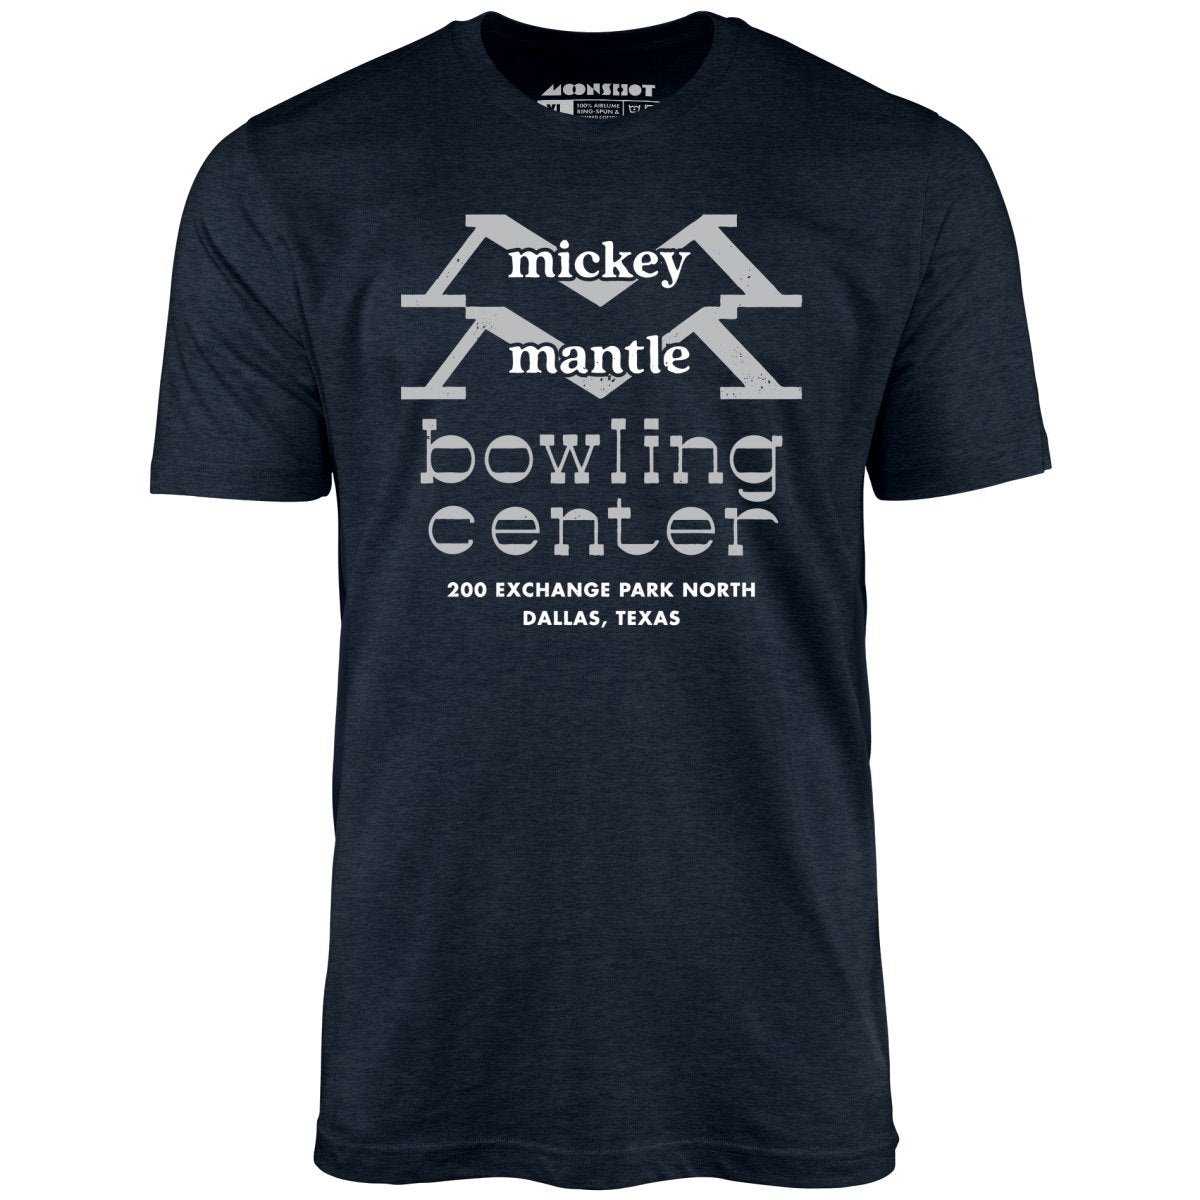 Mickey Mantle Bowling Center - Dallas, TX - Vintage Bowling Alley - Unisex T-Shirt